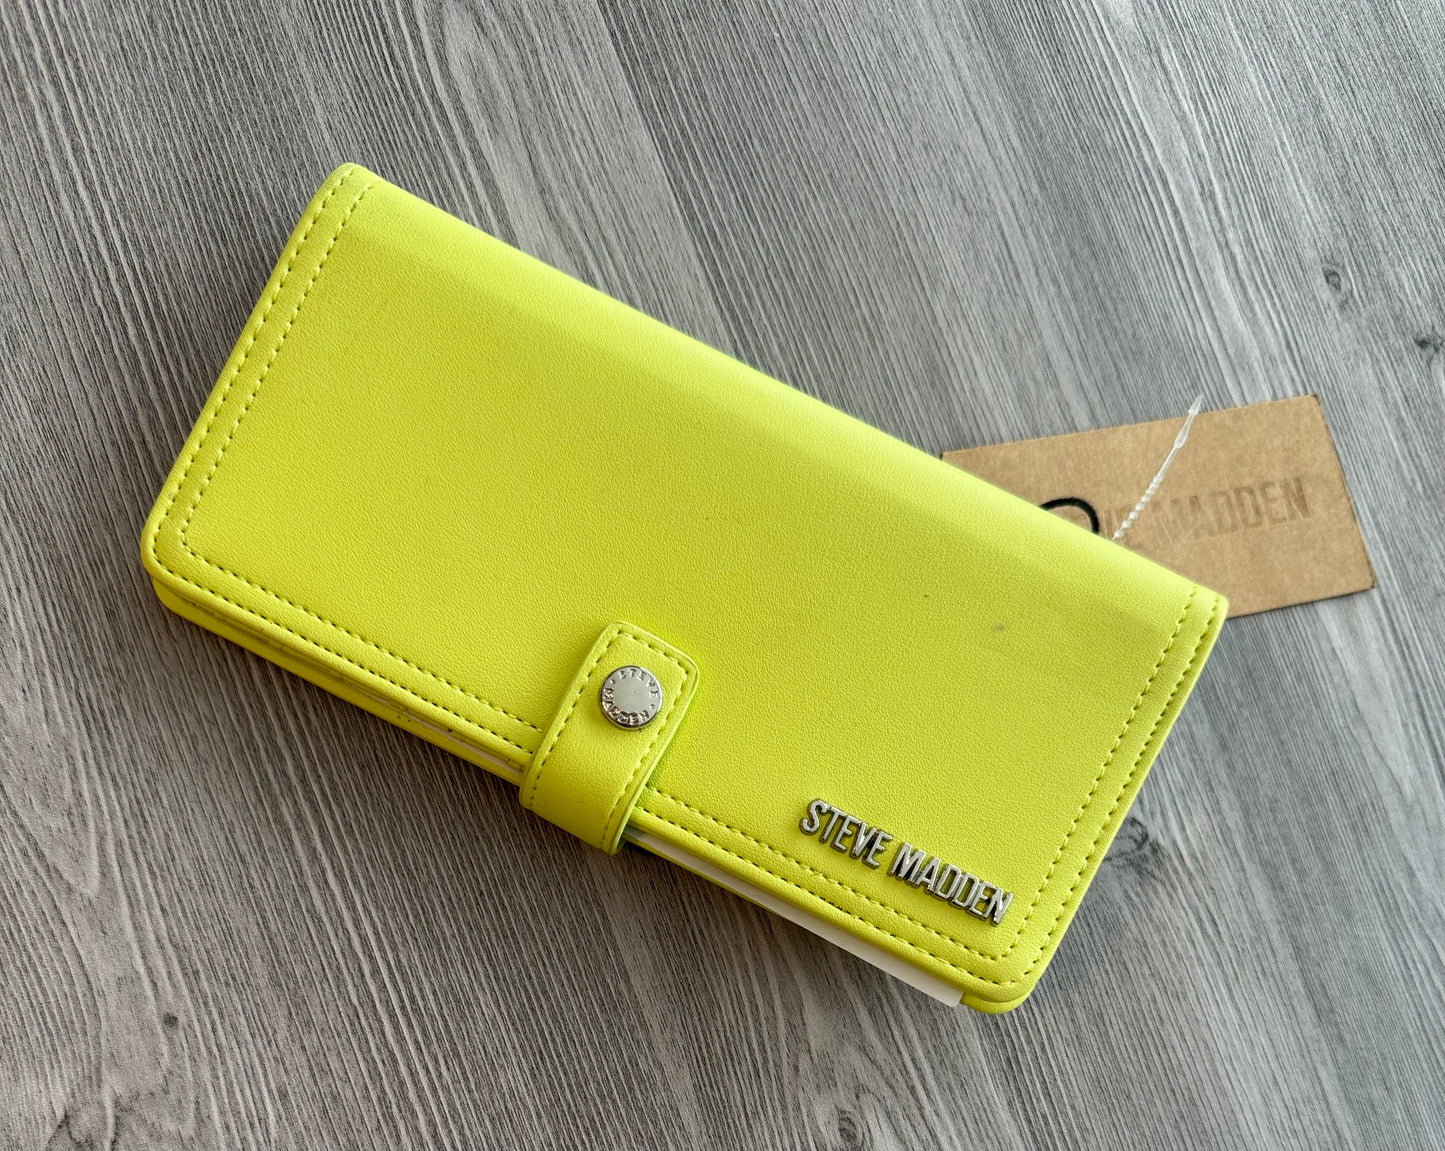 Wallet By Steve Madden  Size: Small